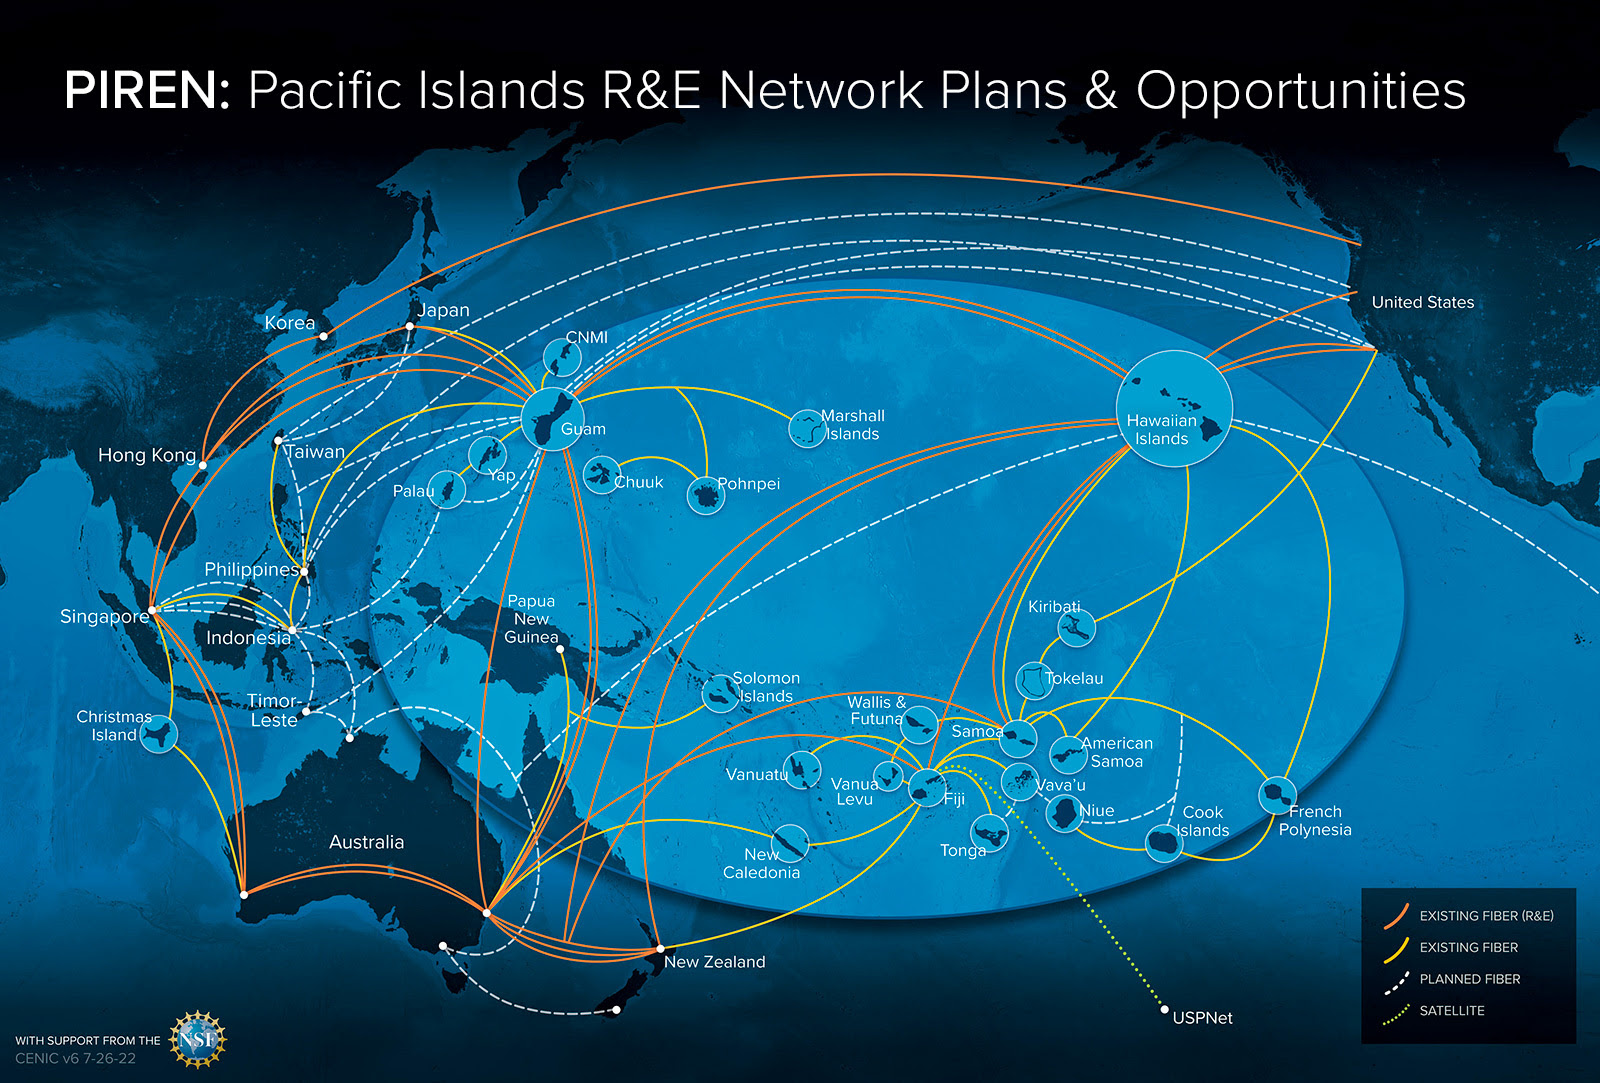 PIREN: Pacific Islands R&E Network Plans and Opportunities